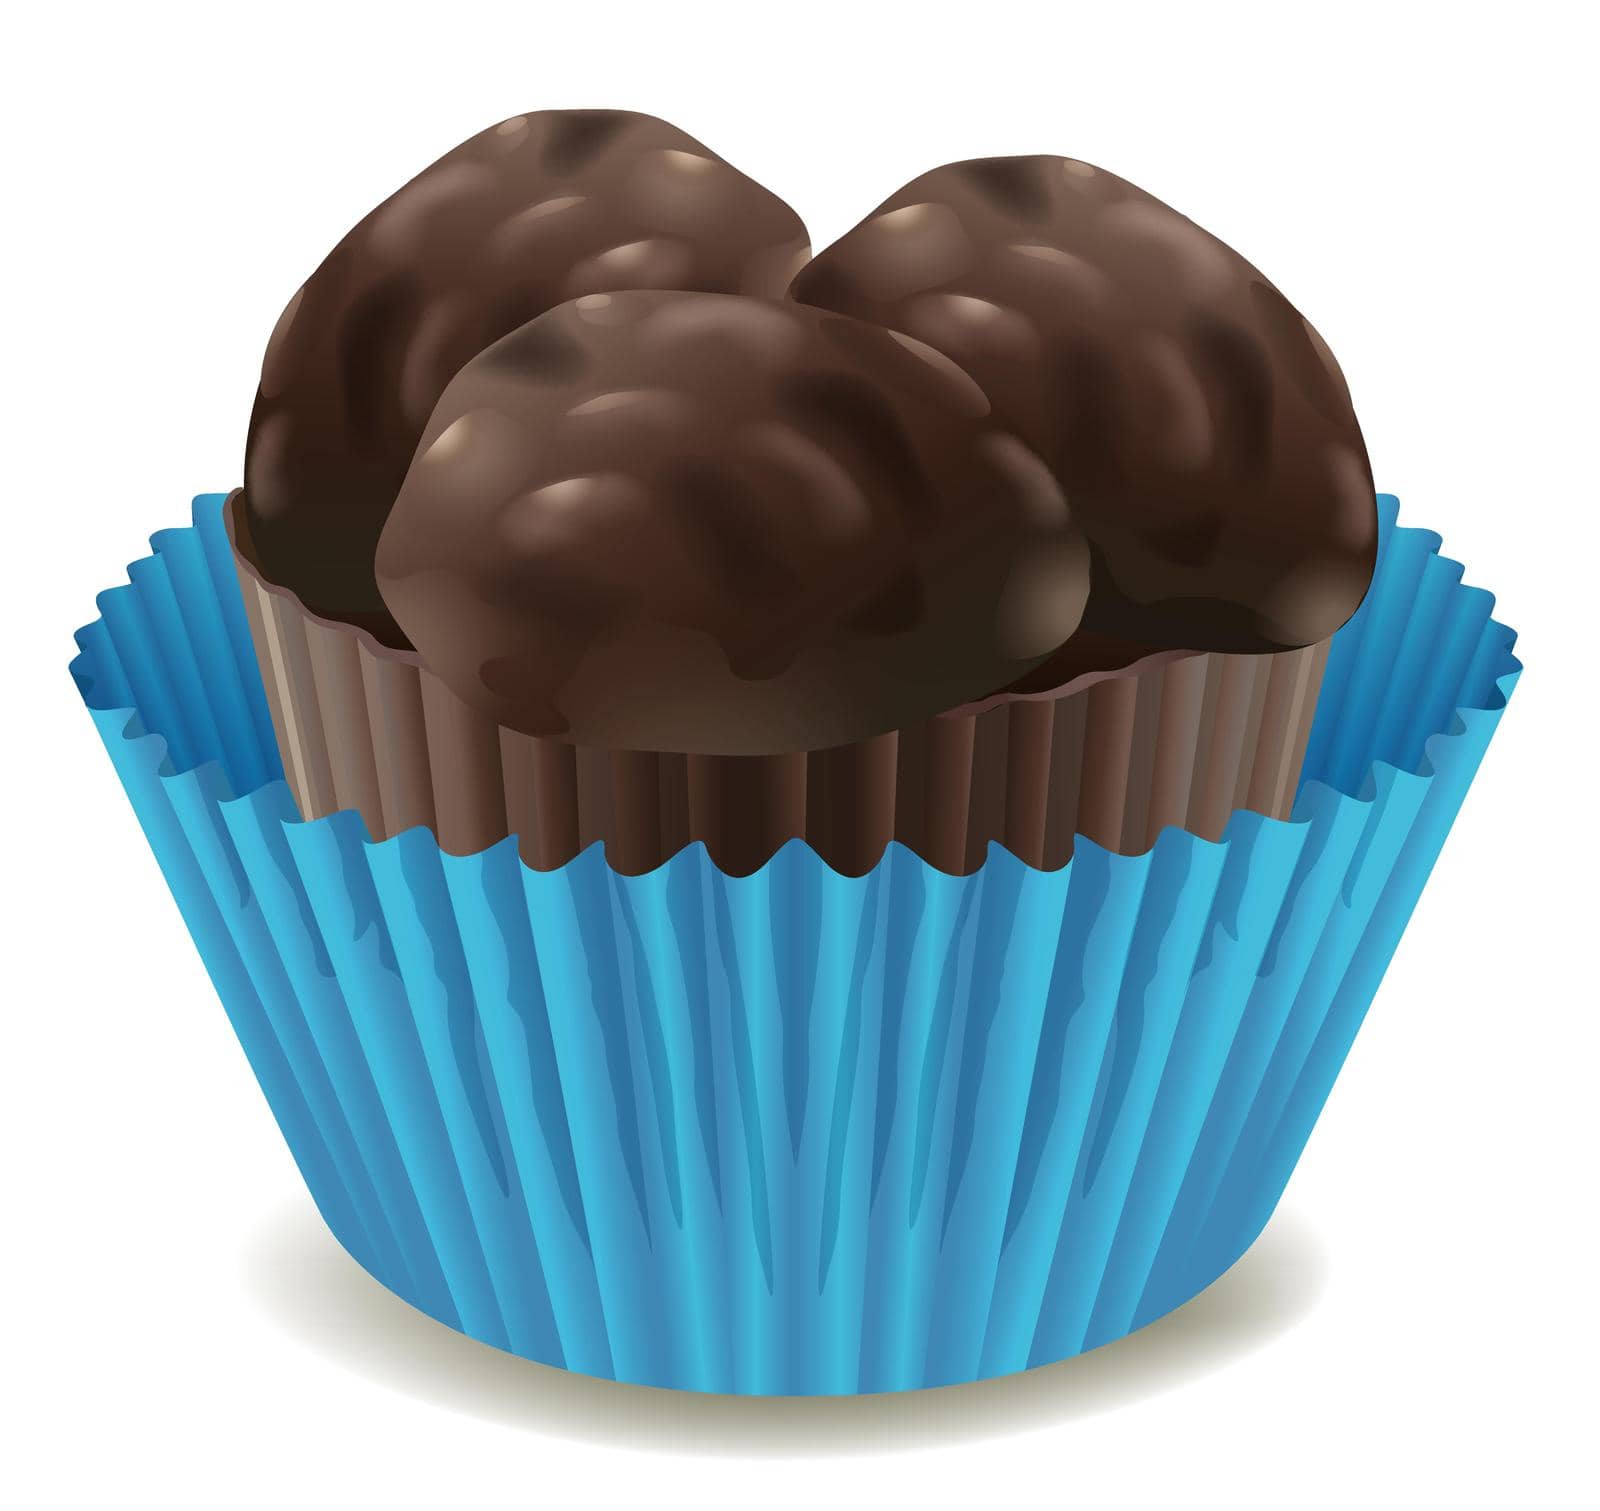 illustration of a cupcake on a white background